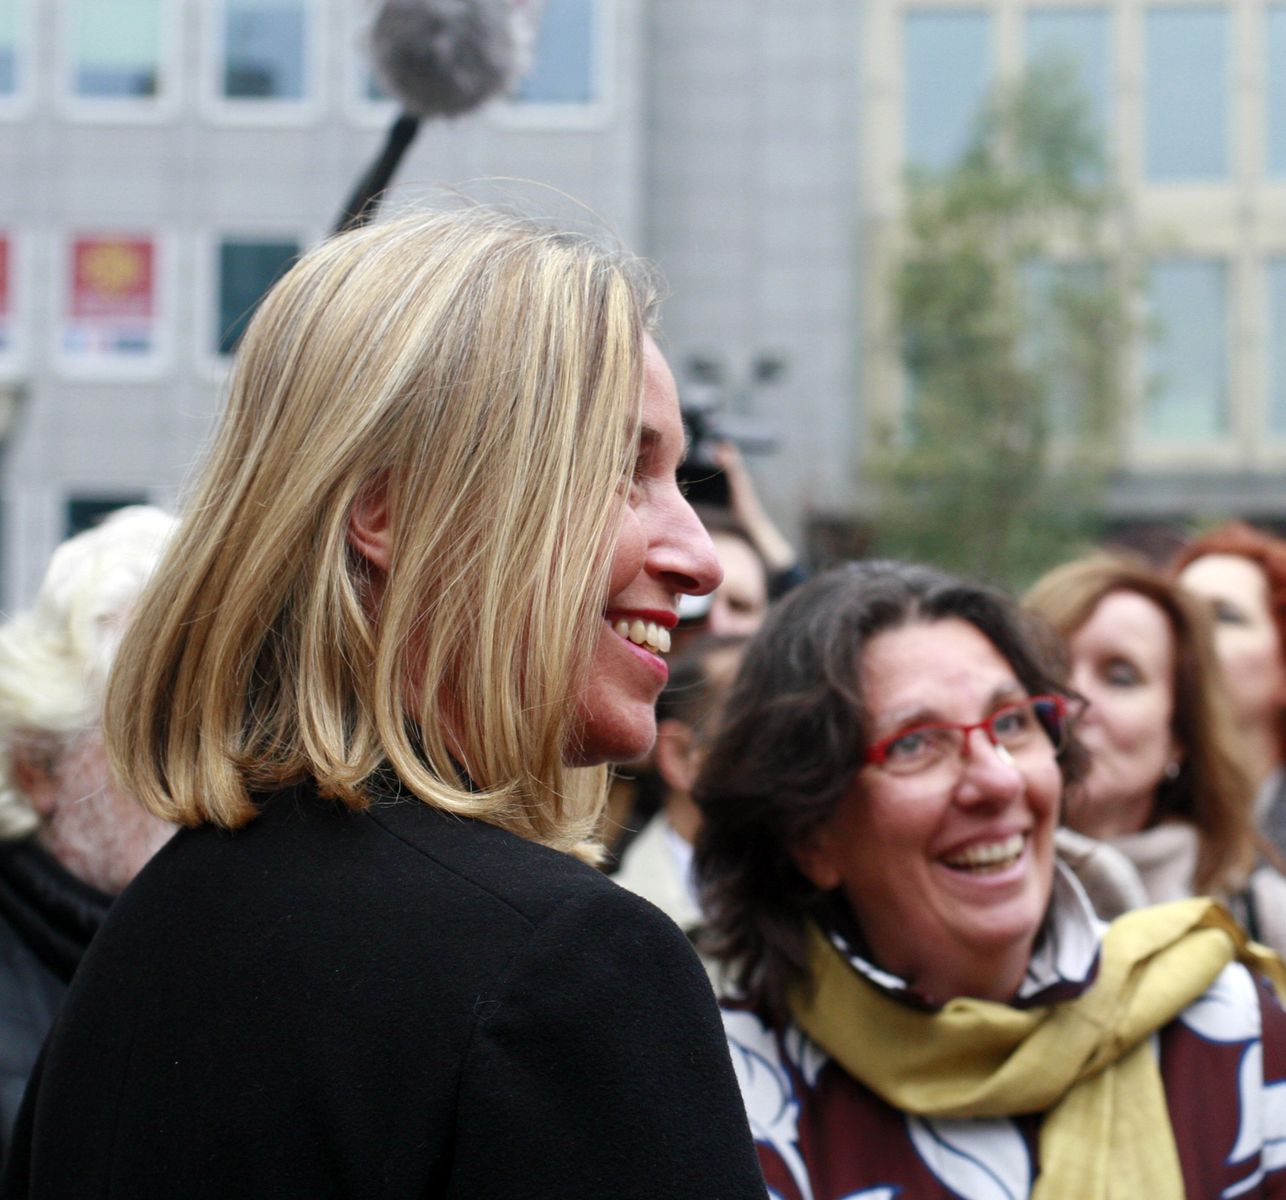 UN in Brussels Director Barbara Pesce-Monteiro and EU foreign policy chief Federica Mogherini 